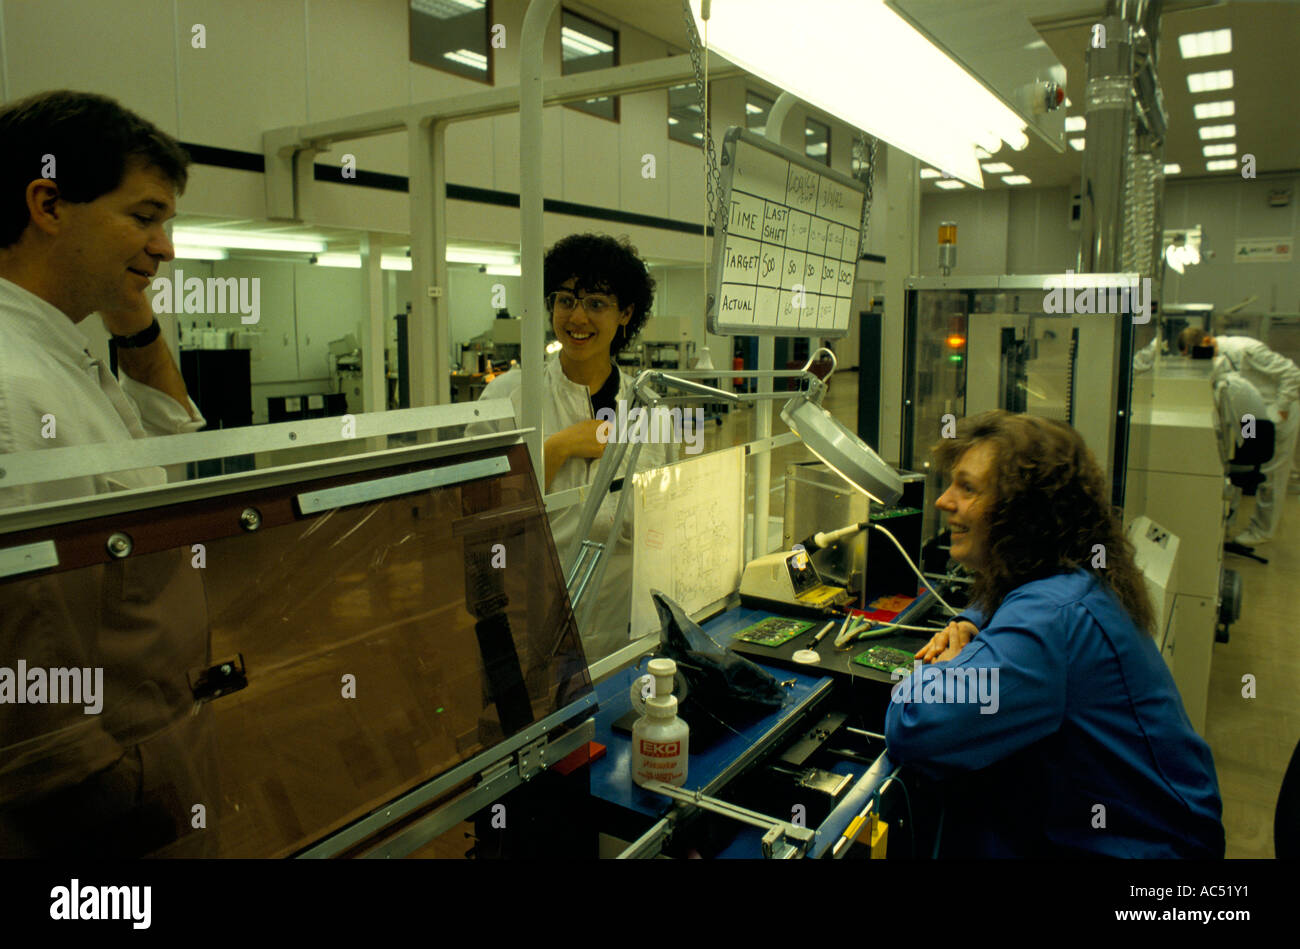 WORKERS CHATTING AT CHIP PLACEMENT CENTRE PANASONIC FACTORY NEWBURY MARCH 1992 Stock Photo